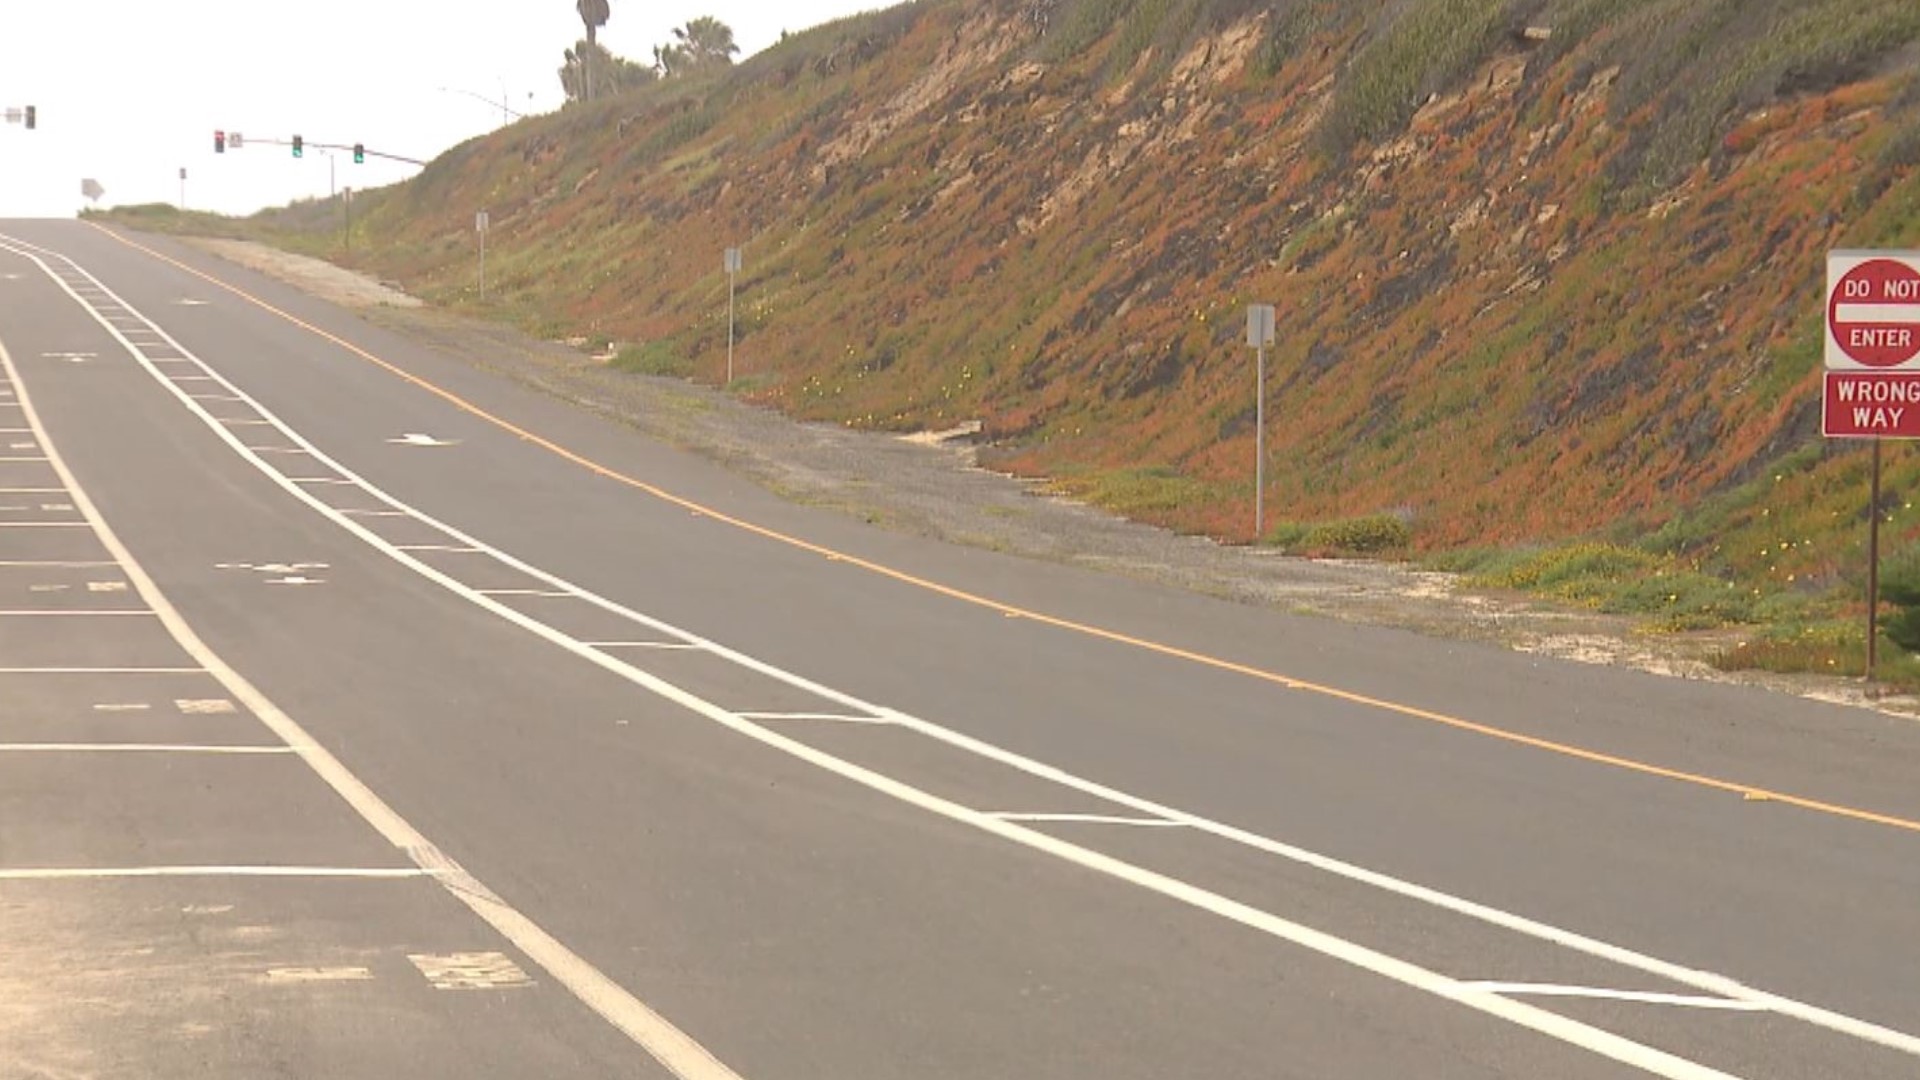 The City of Carlsbad looking to reroute a section of Highway 101, also known as Carlsbad Boulevard, to protect from rising sea levels.